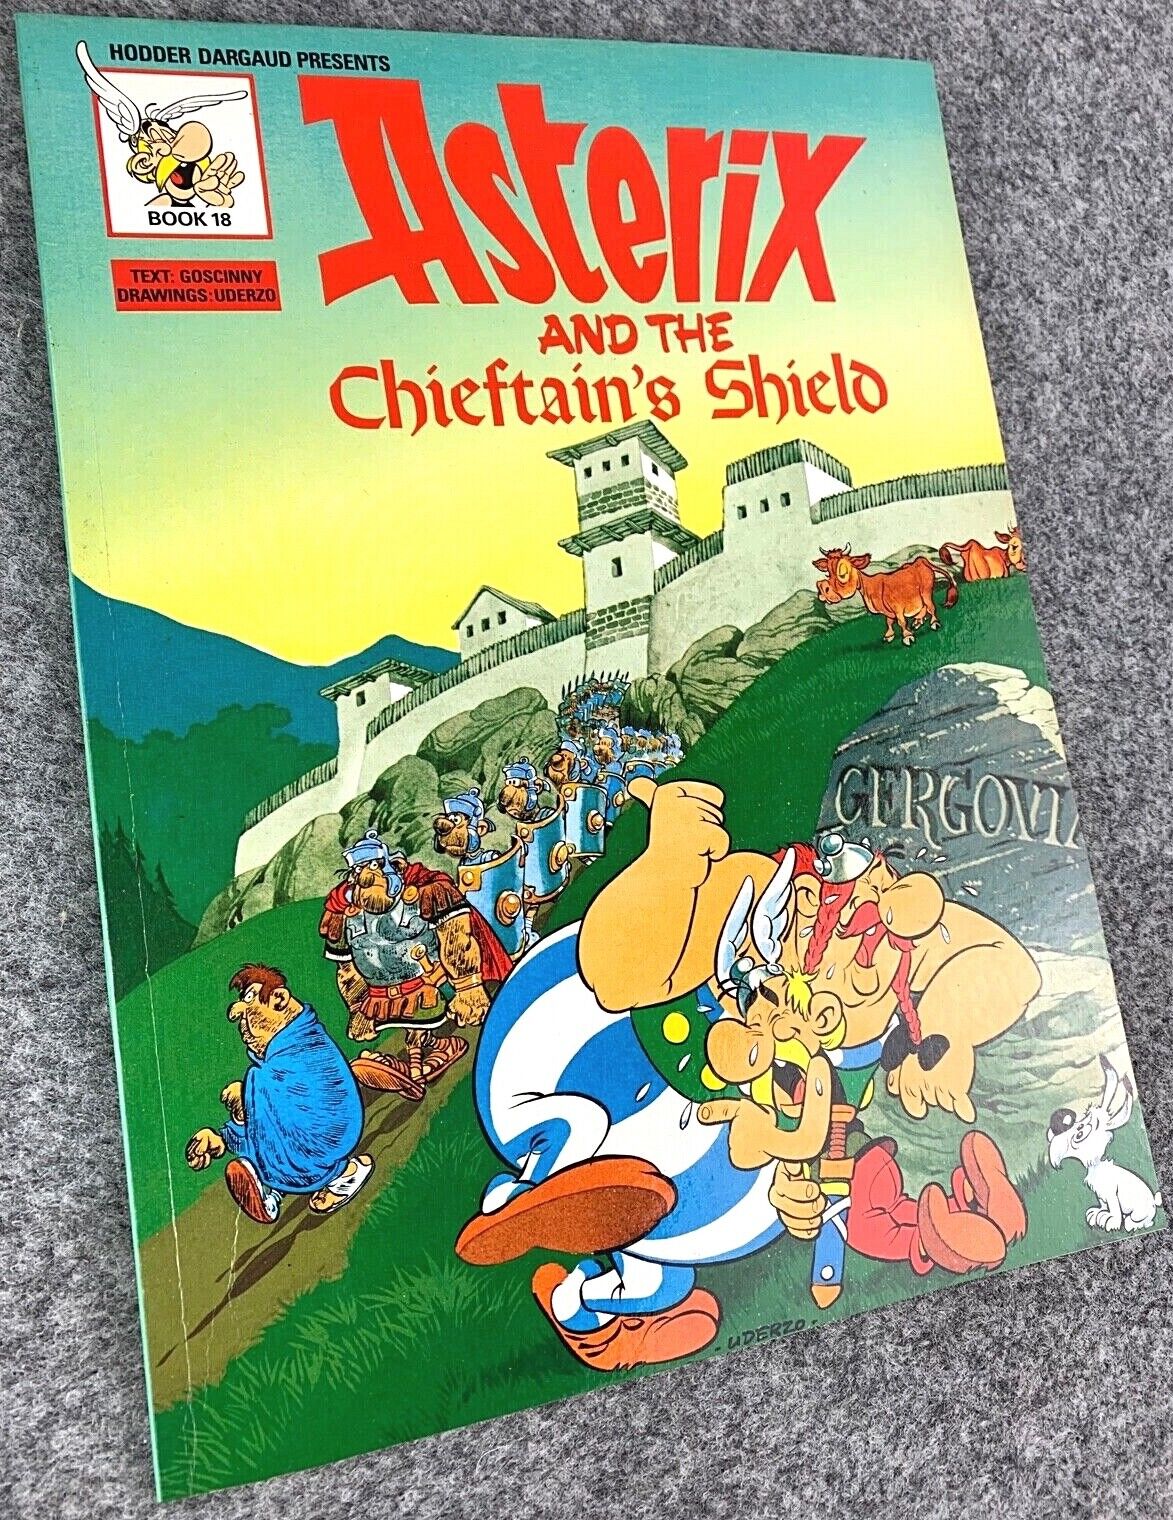 Asterix & the Chieftain's Shield - 1970/80s Hodder/Dargaud UK Edition Paperback Book Uderzo